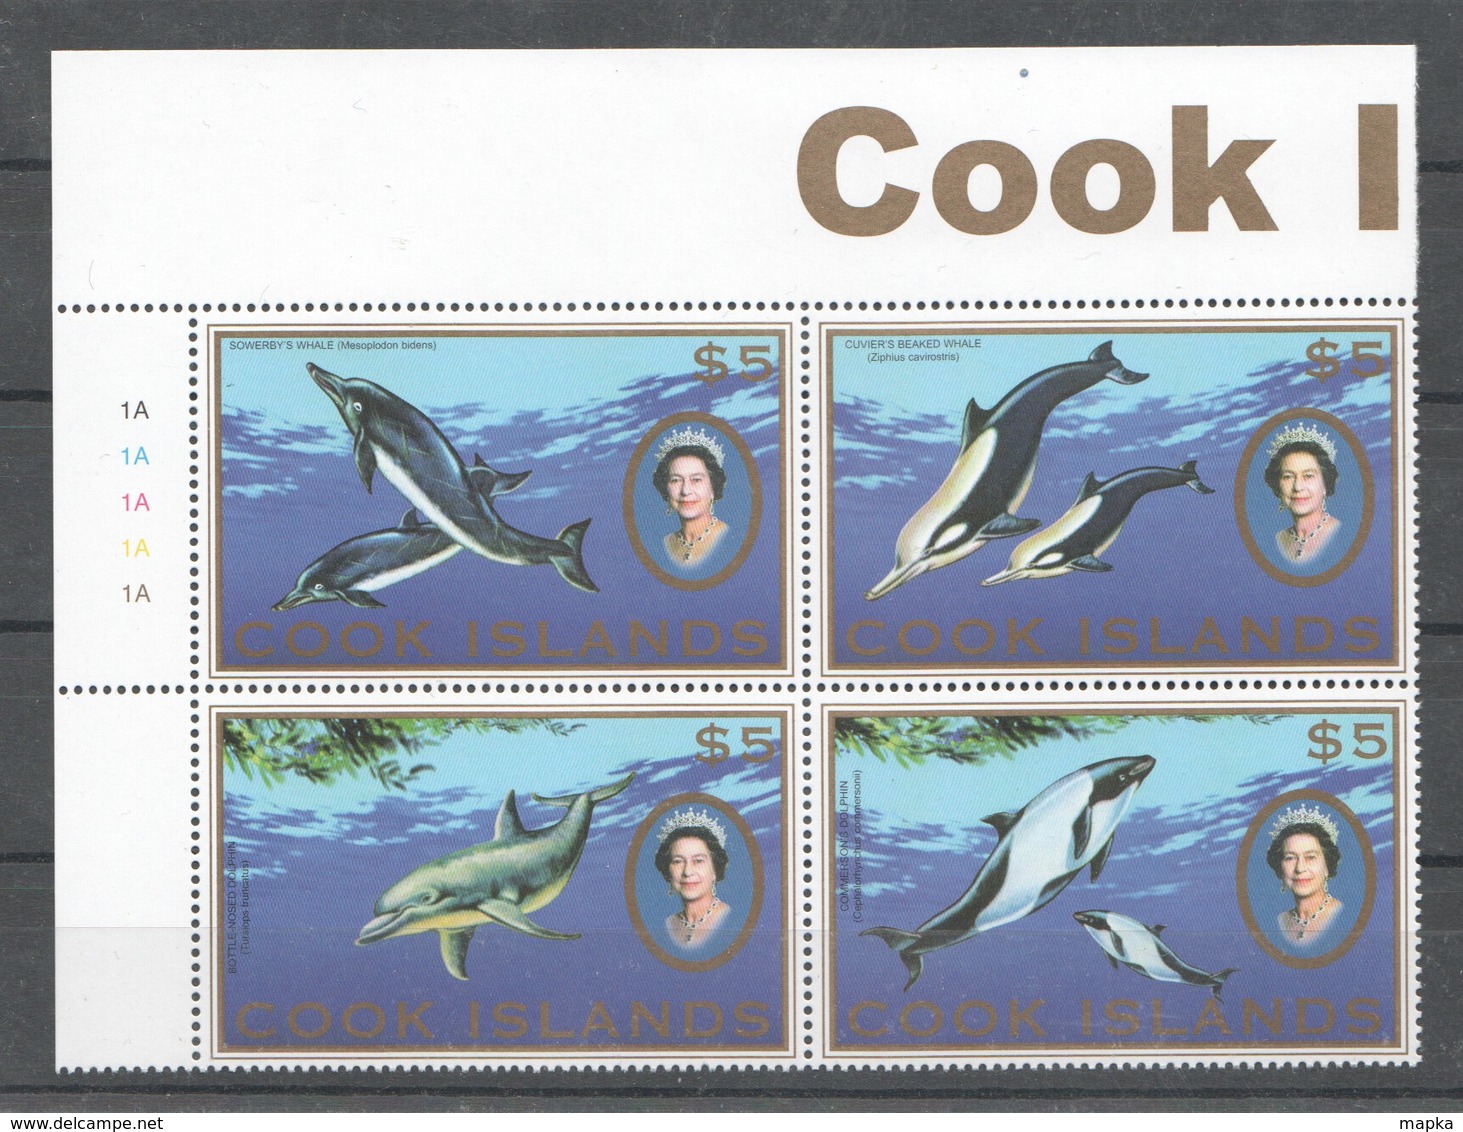 B131 COOK ISLANDS MARINE LIFE DOLPHINS WHALES QUEEN !!! MICHEL 40 EURO 1SET MNH - Dolphins